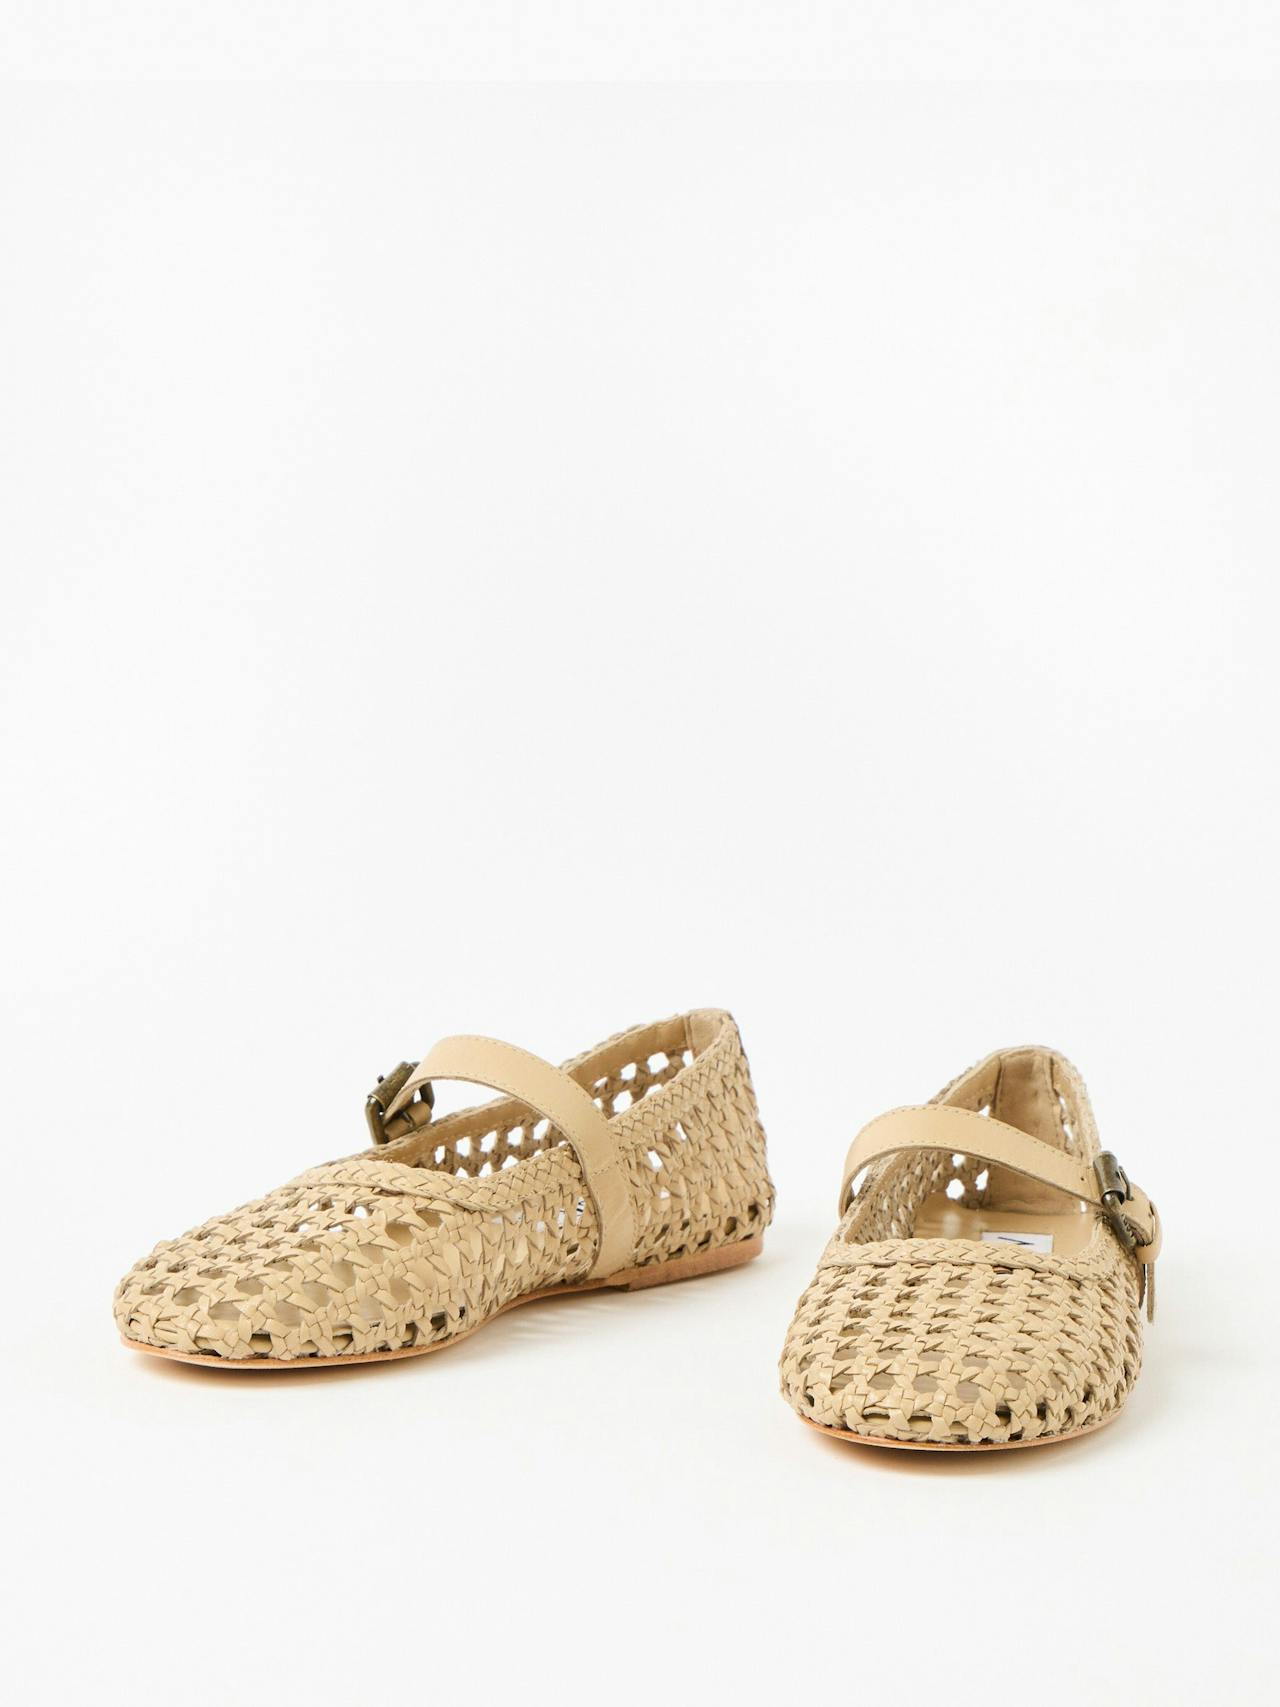 Asra neve woven leather Mary Jane flats